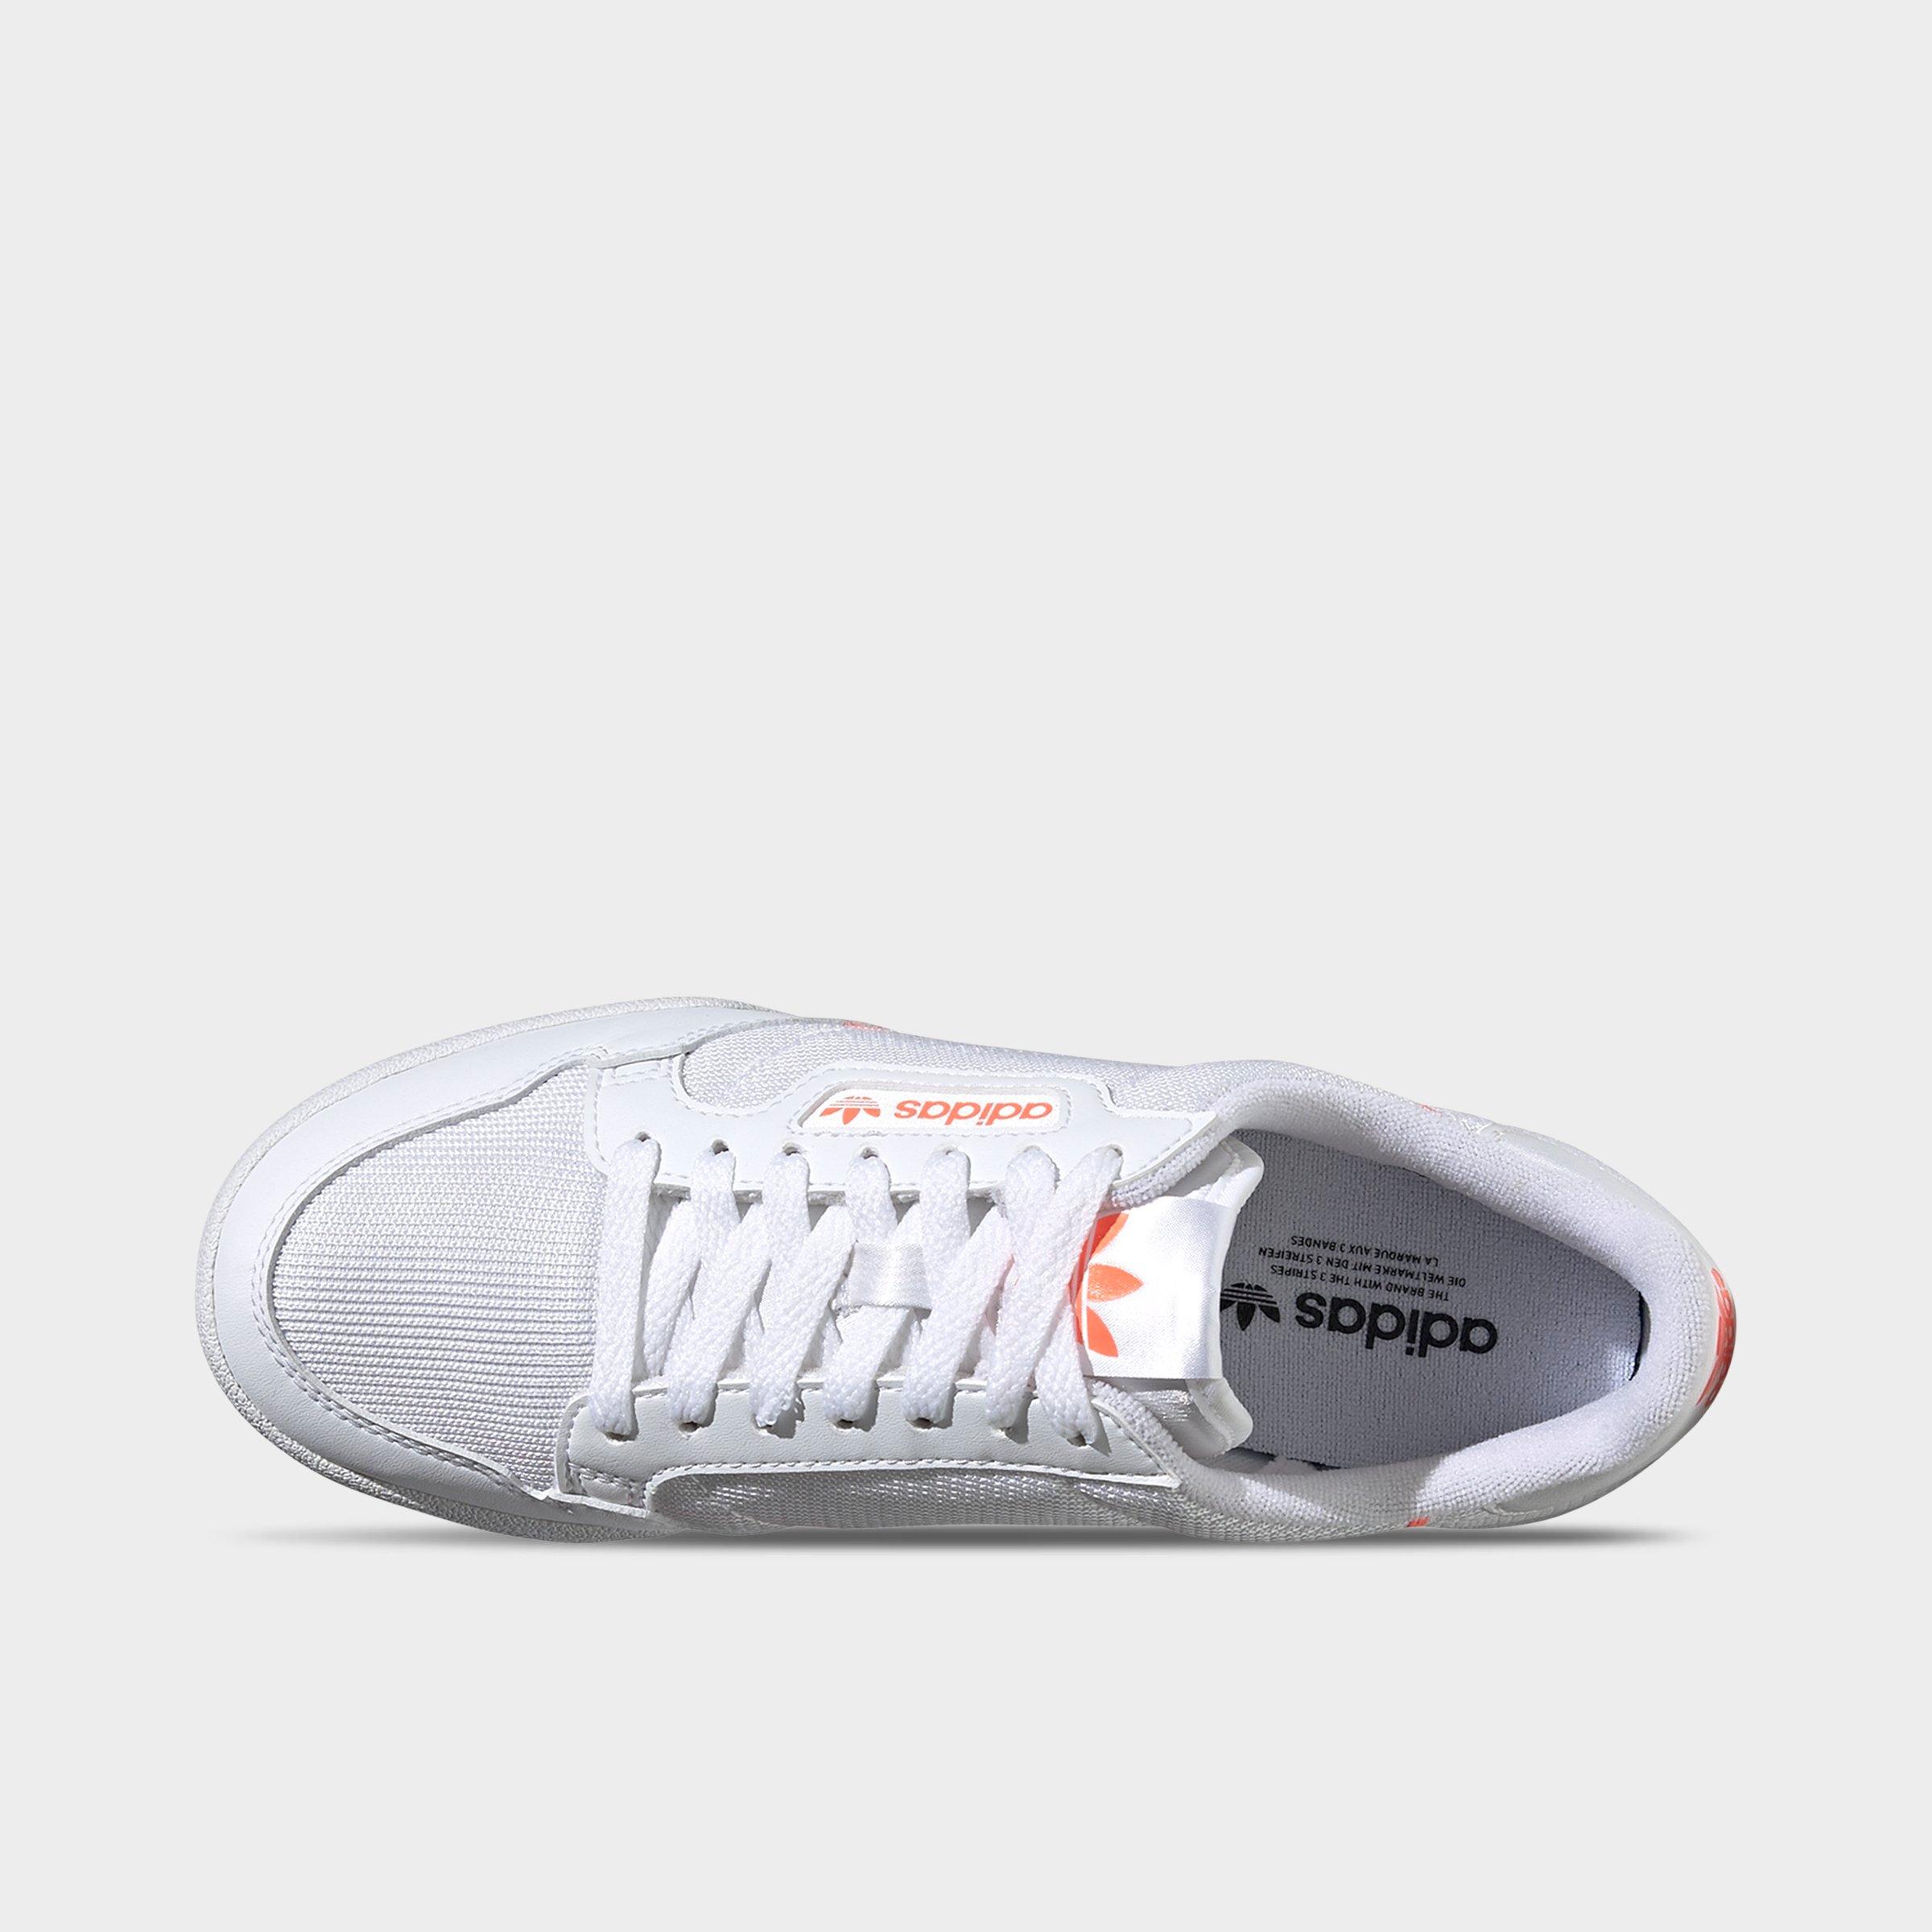 men's originals continental 80 casual sneakers from finish line